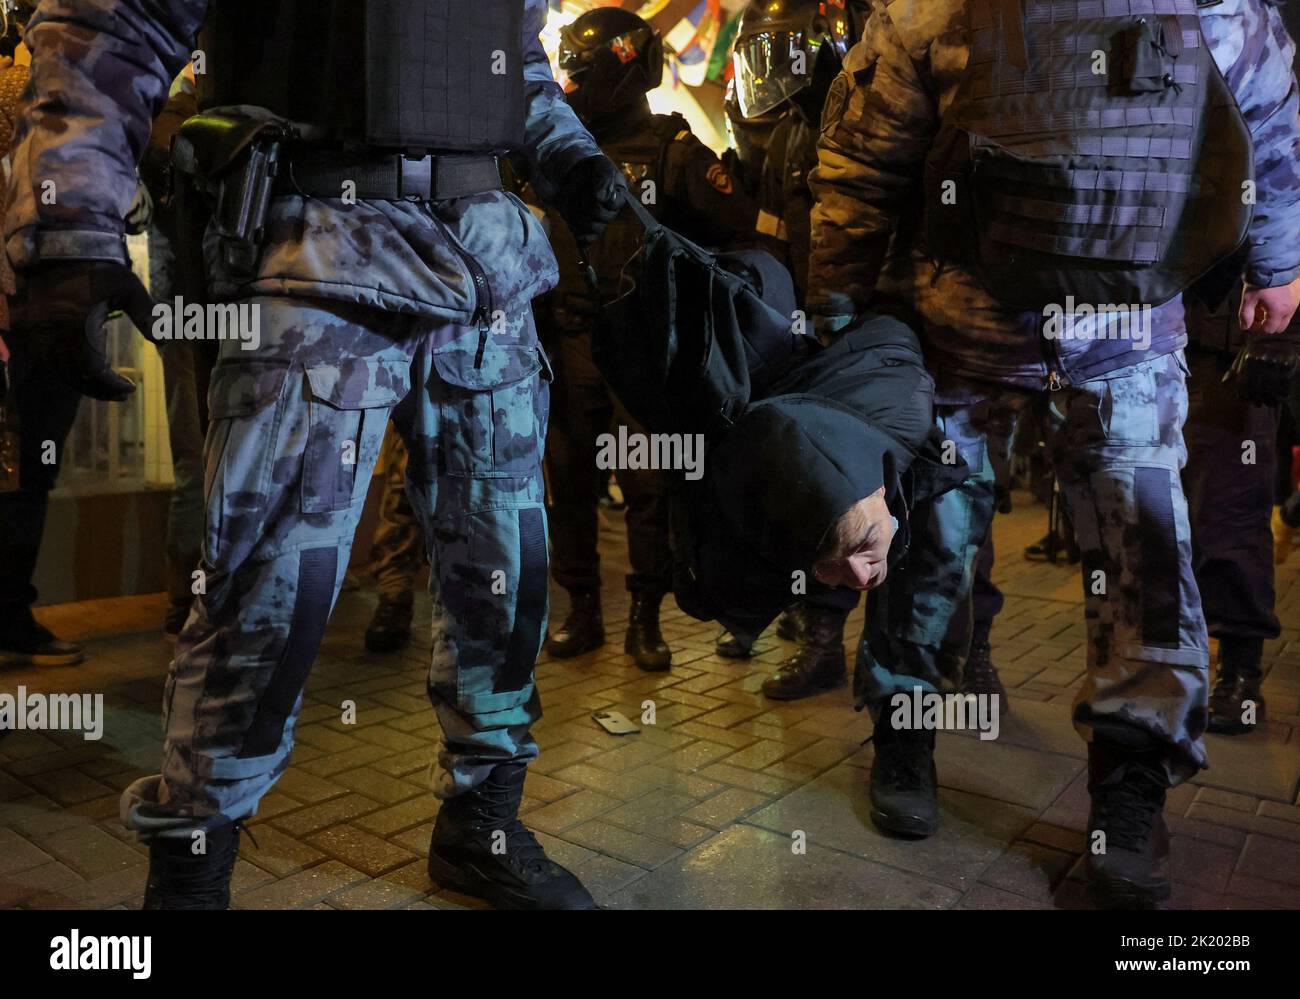 Russian police officers detain a person during an unsanctioned rally, after opposition activists called for street protests against the mobilisation of reservists ordered by President Vladimir Putin, in Moscow, Russia September 21, 2022. REUTERS/REUTERS PHOTOGRAPHER Stock Photo